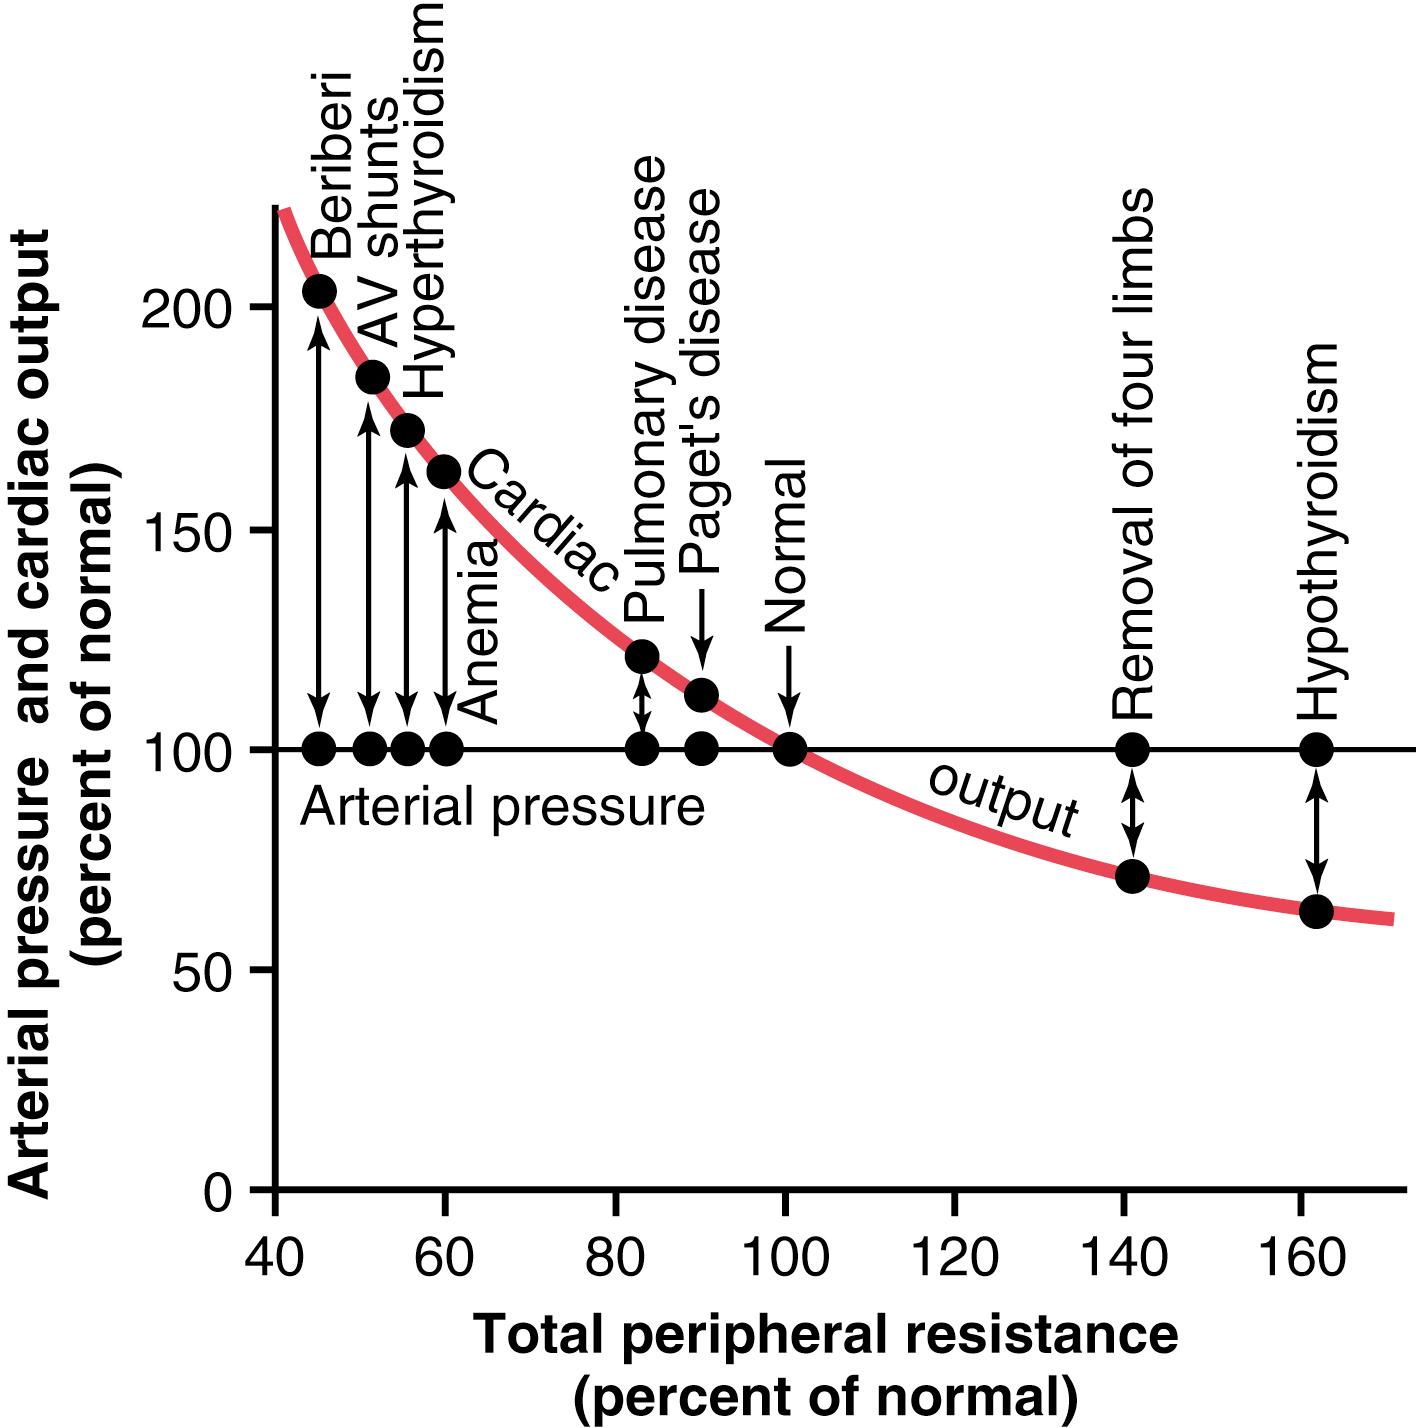 Figure 19-5., Relationships of total peripheral resistance to the long-term levels of arterial pressure and cardiac output in different clinical abnormalities. In these conditions, the kidneys were functioning normally. Note that changing the whole-body total peripheral resistance caused equal and opposite changes in cardiac output but, in all cases, had no effect on arterial pressure. AV, Arteriovenous.